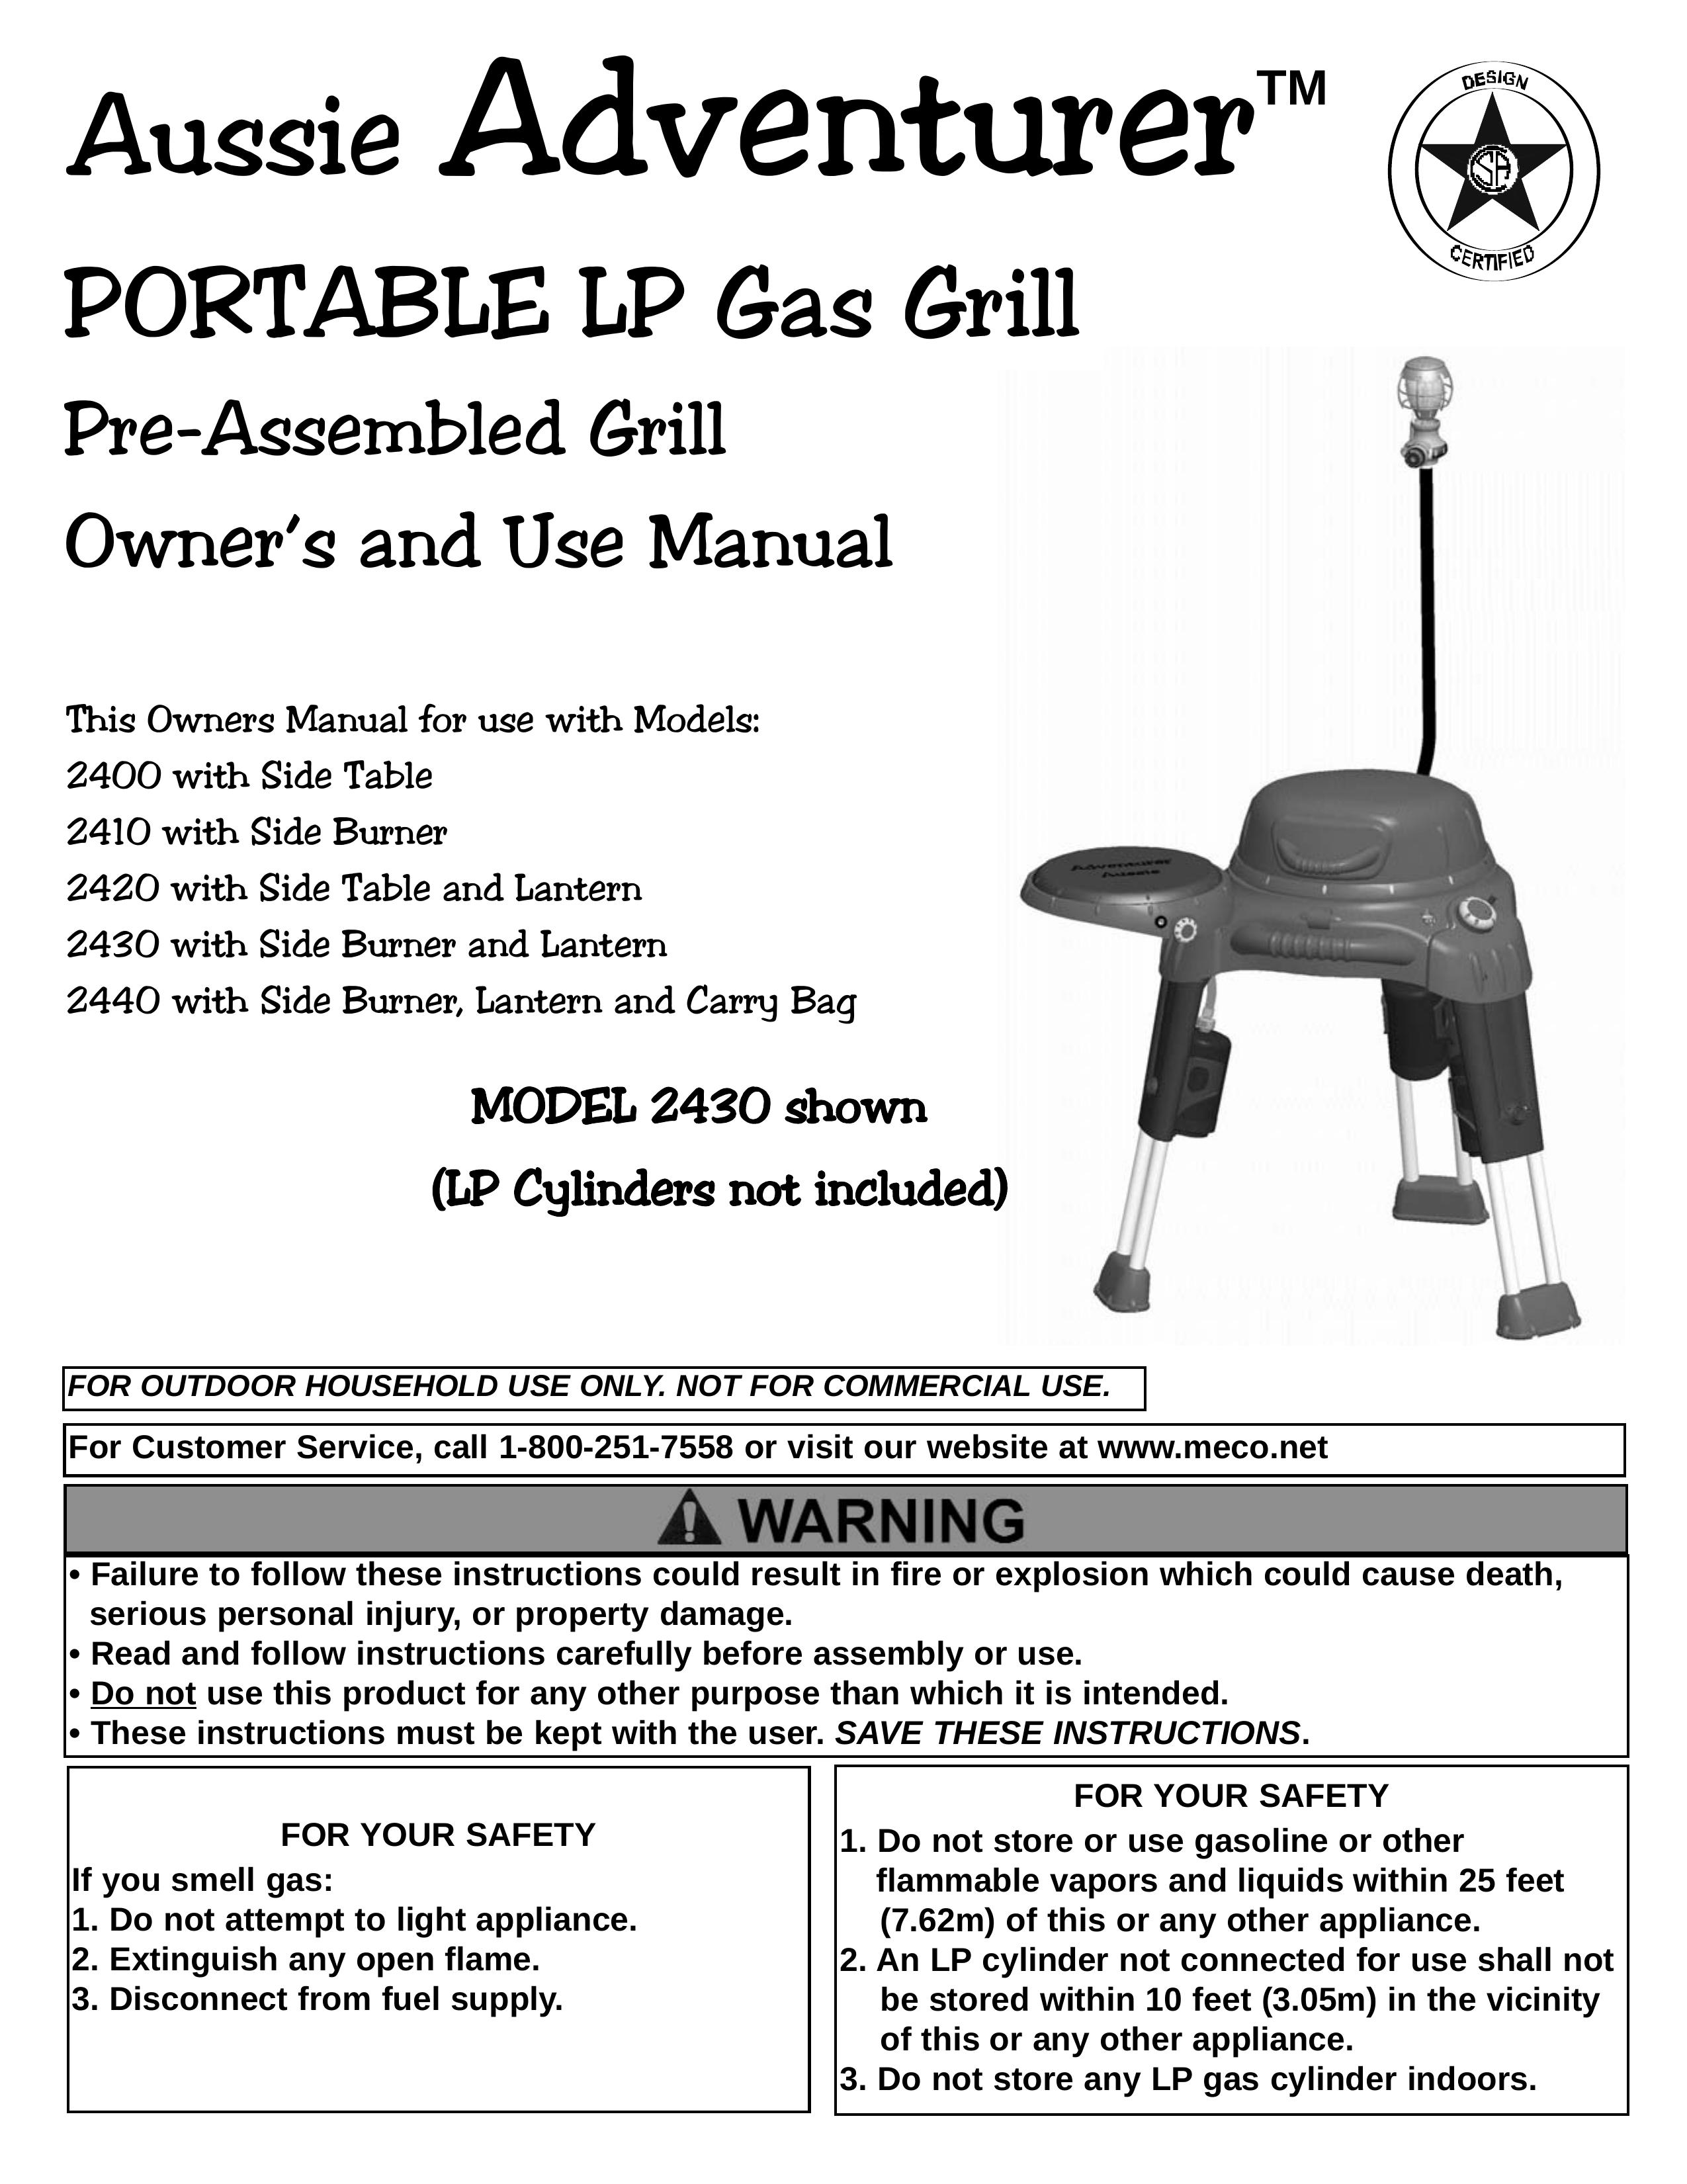 Meco 2410 Gas Grill User Manual